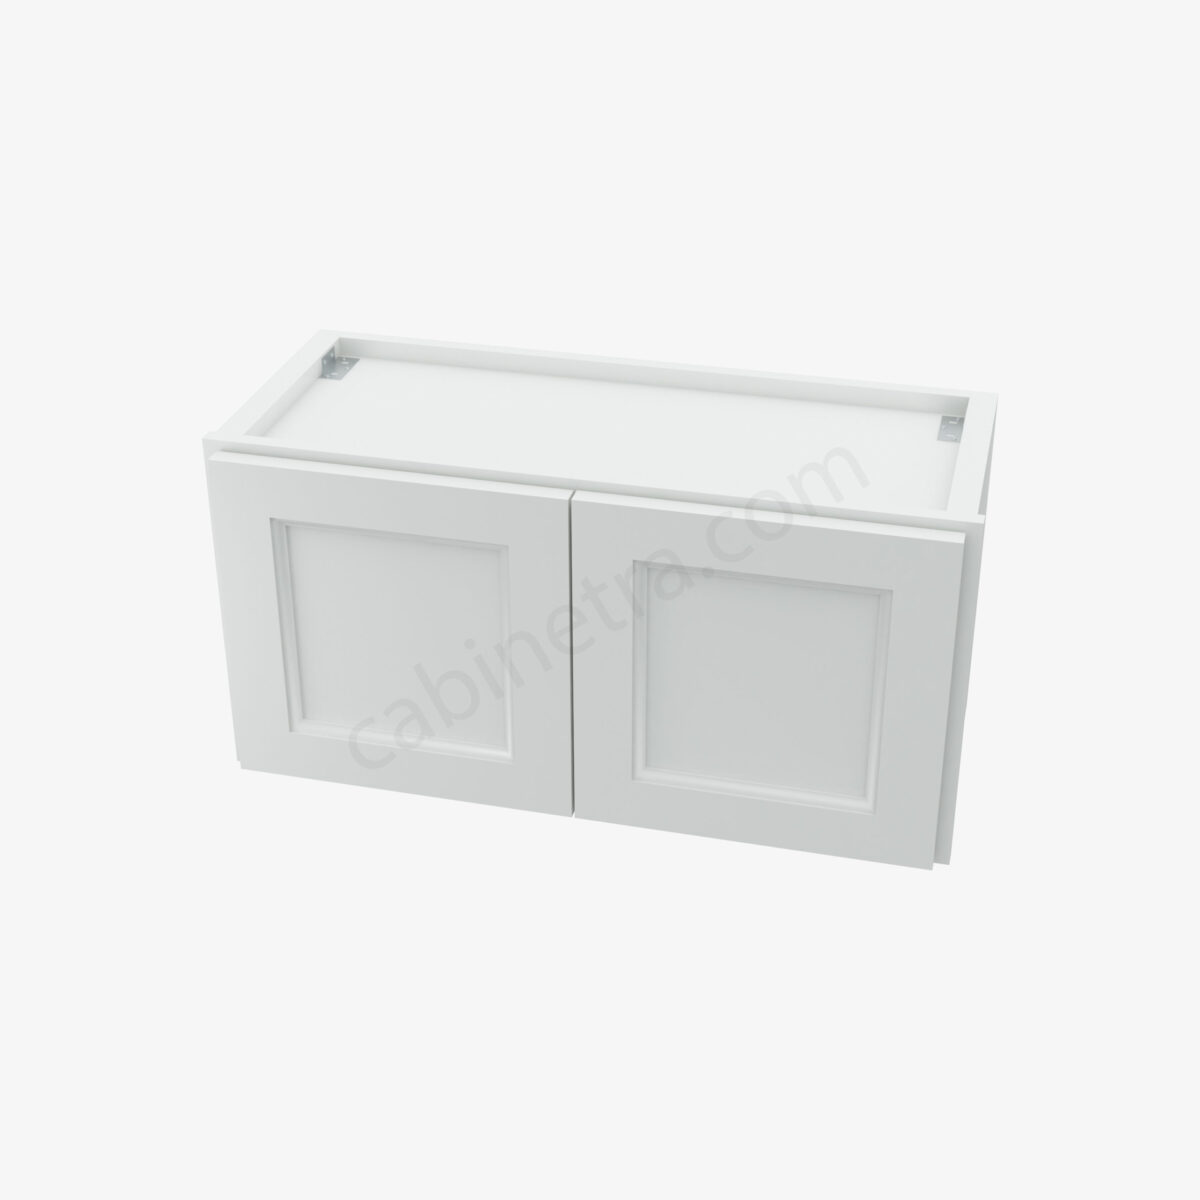 TW W3015B 3 Forevermark Uptown White Cabinetra scaled